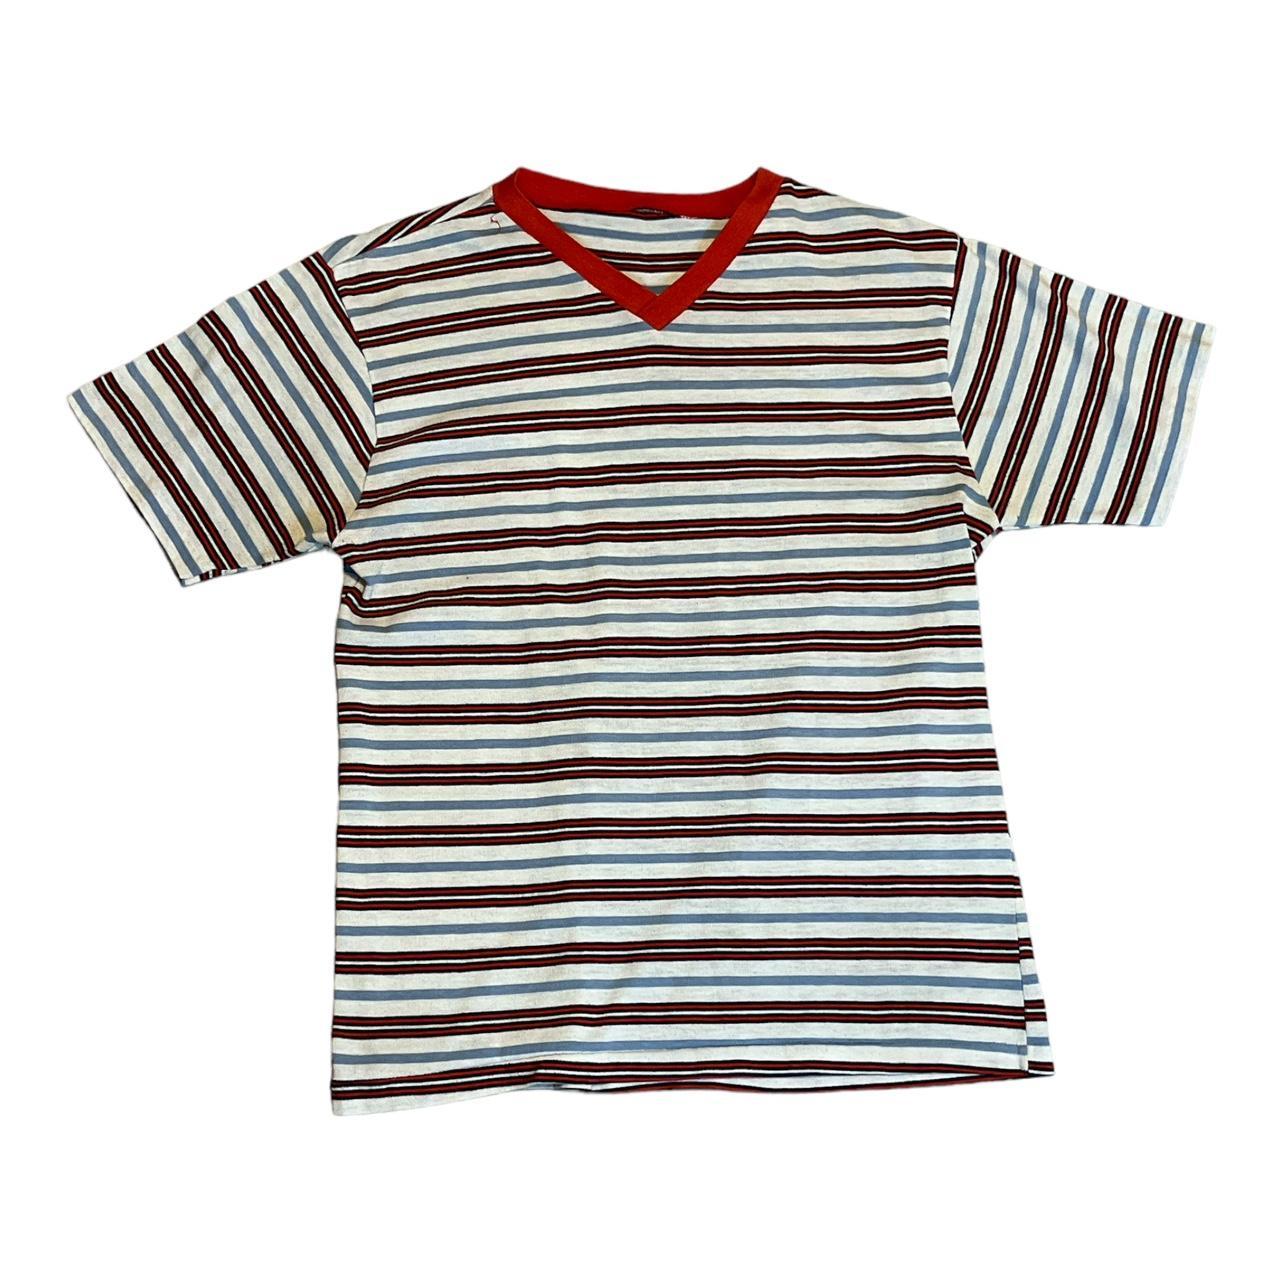 1960s Striped White V Neck T shirt Tee with red...